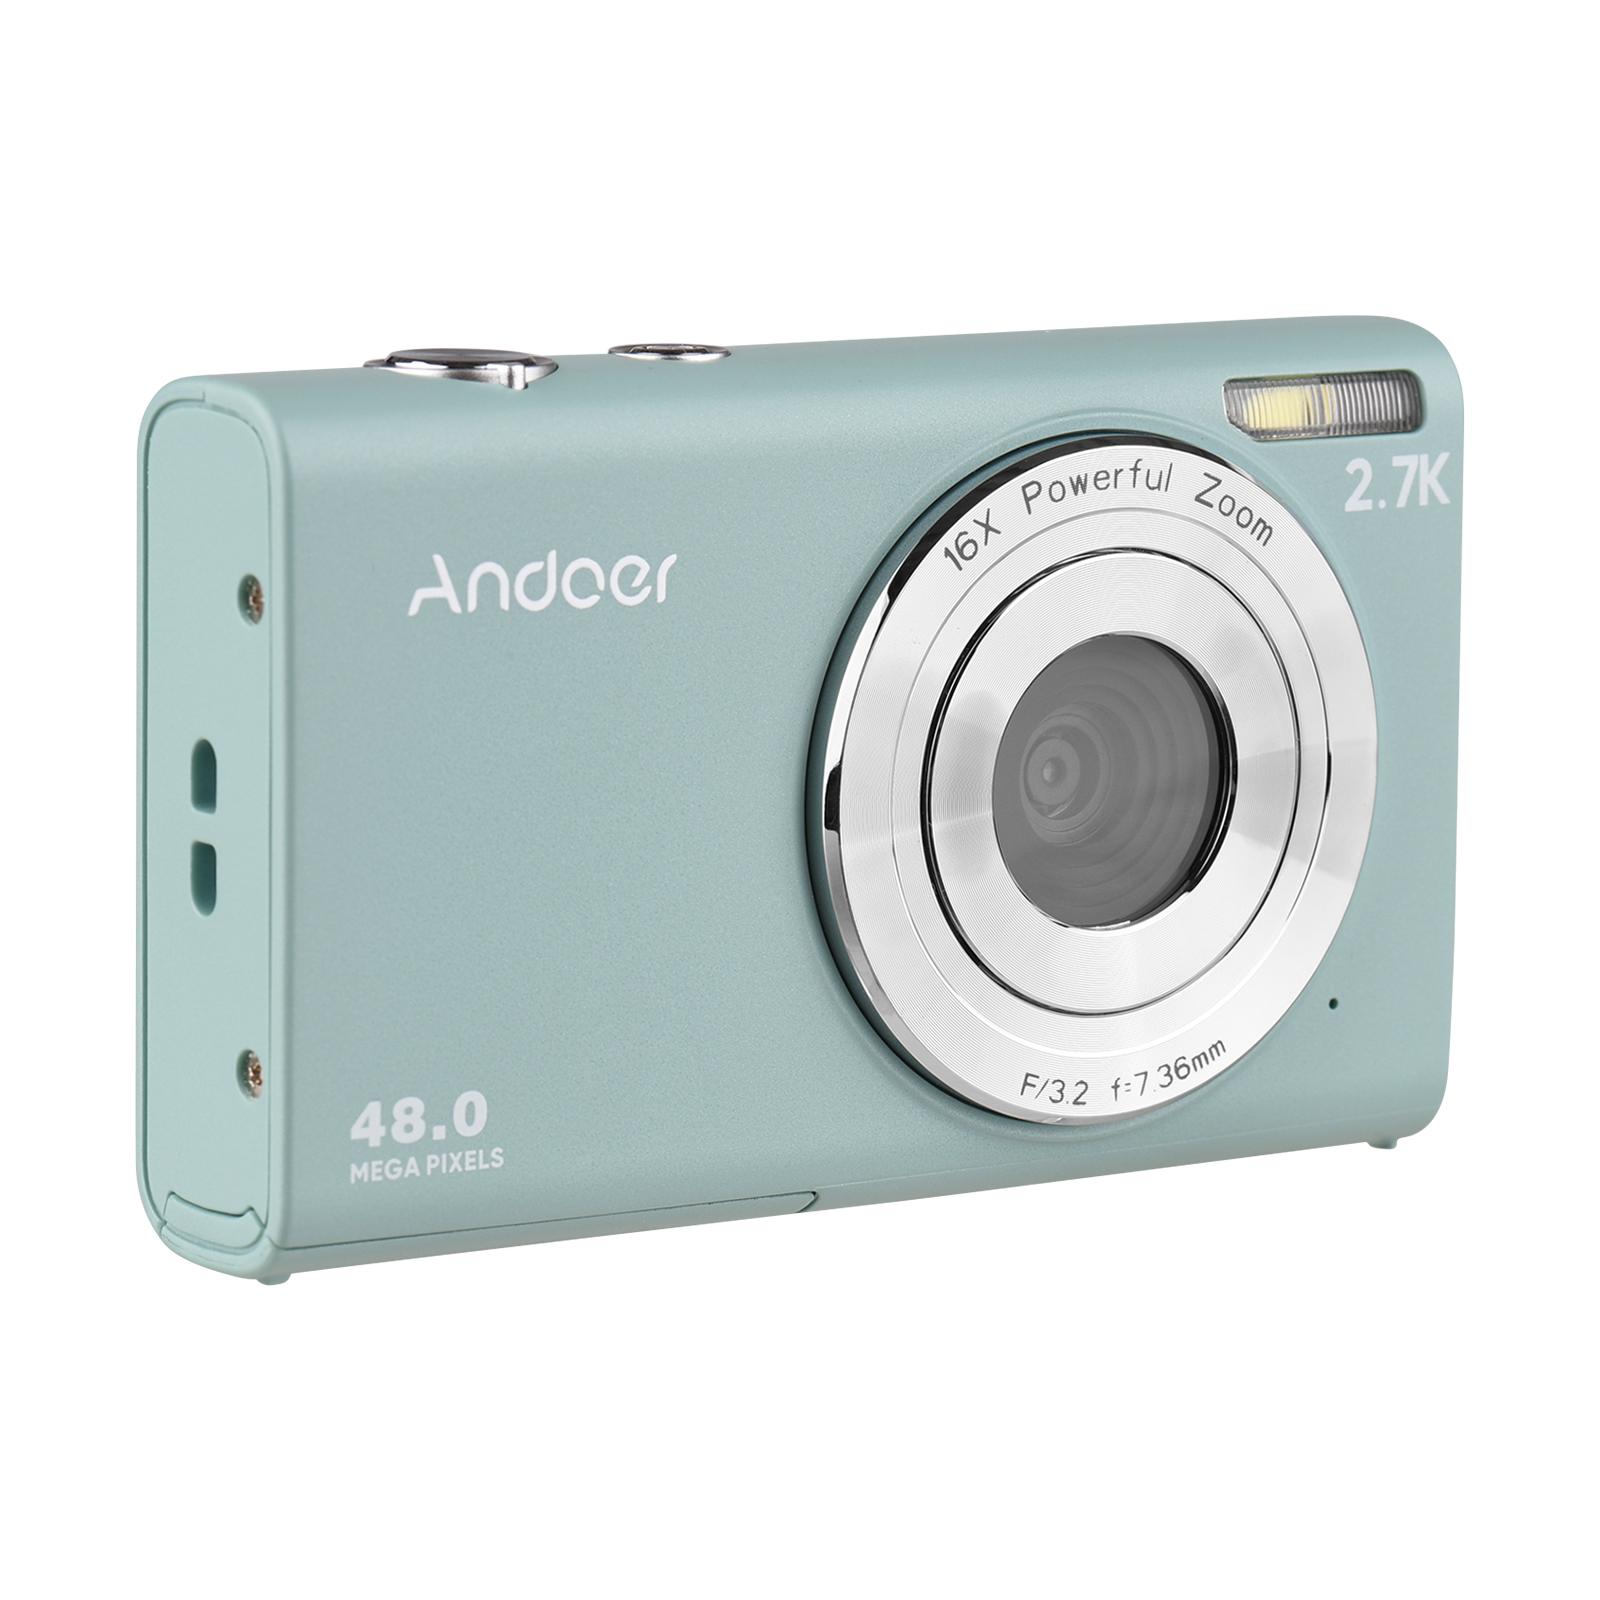 Andoer 2.7K Digital Camera Compact Video Camcorder 48MP Auto Focus 2.88 Inch IPS Screen 16X Zoom